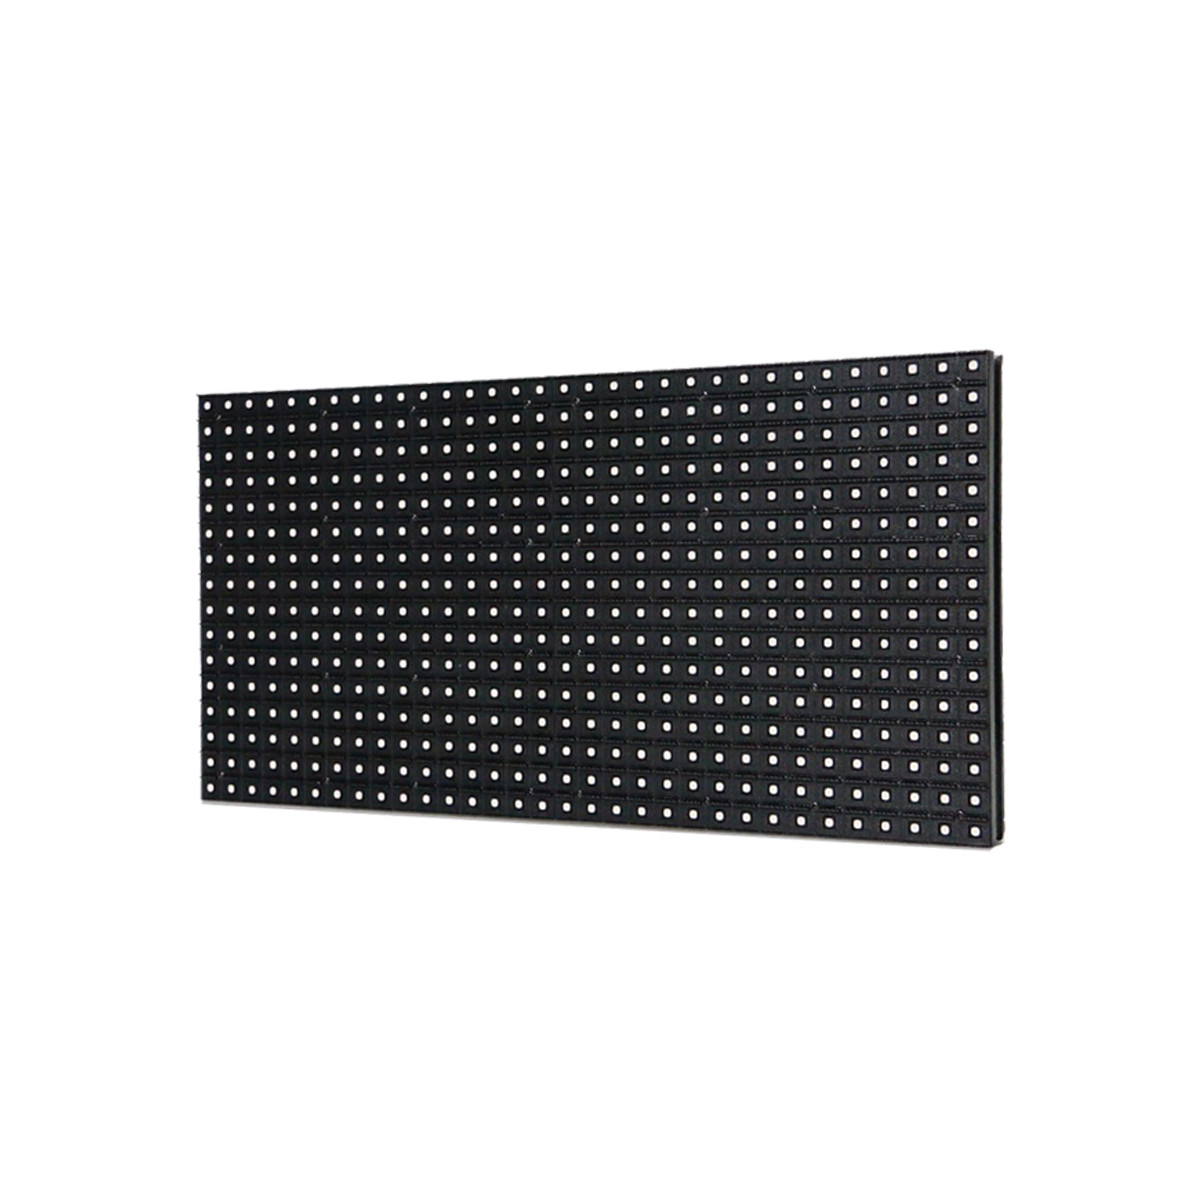 P5 Outdoor SMD LED Display Module 320*160mm SMD2727 5000cd/㎡ Brightness 1920Hz High Refresh